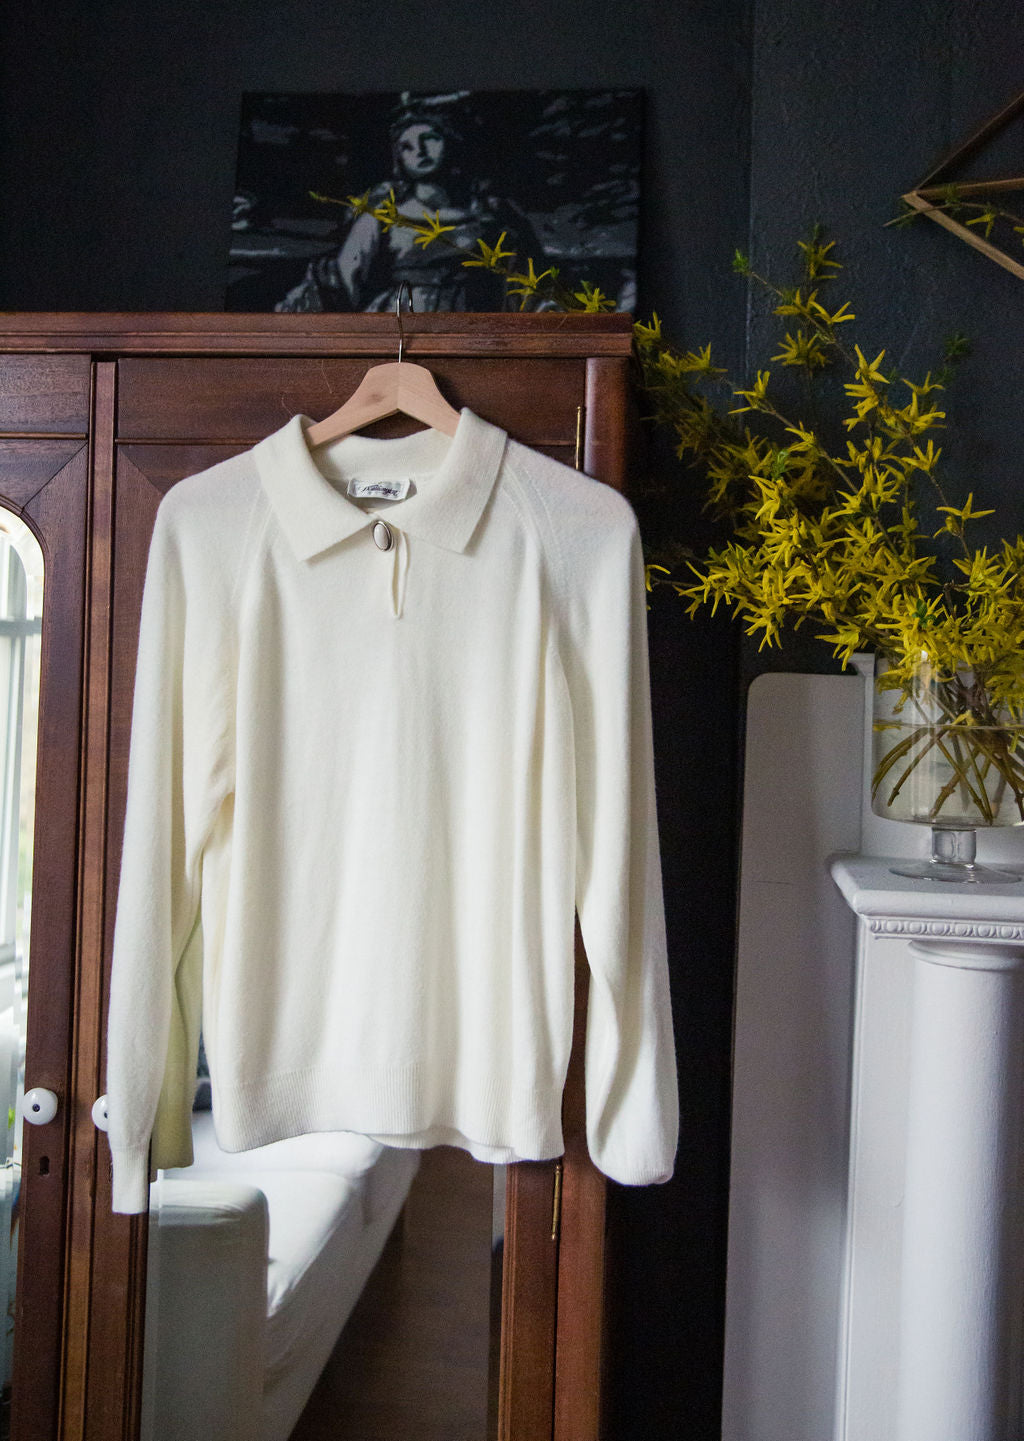 Vintage White Collared Sweater